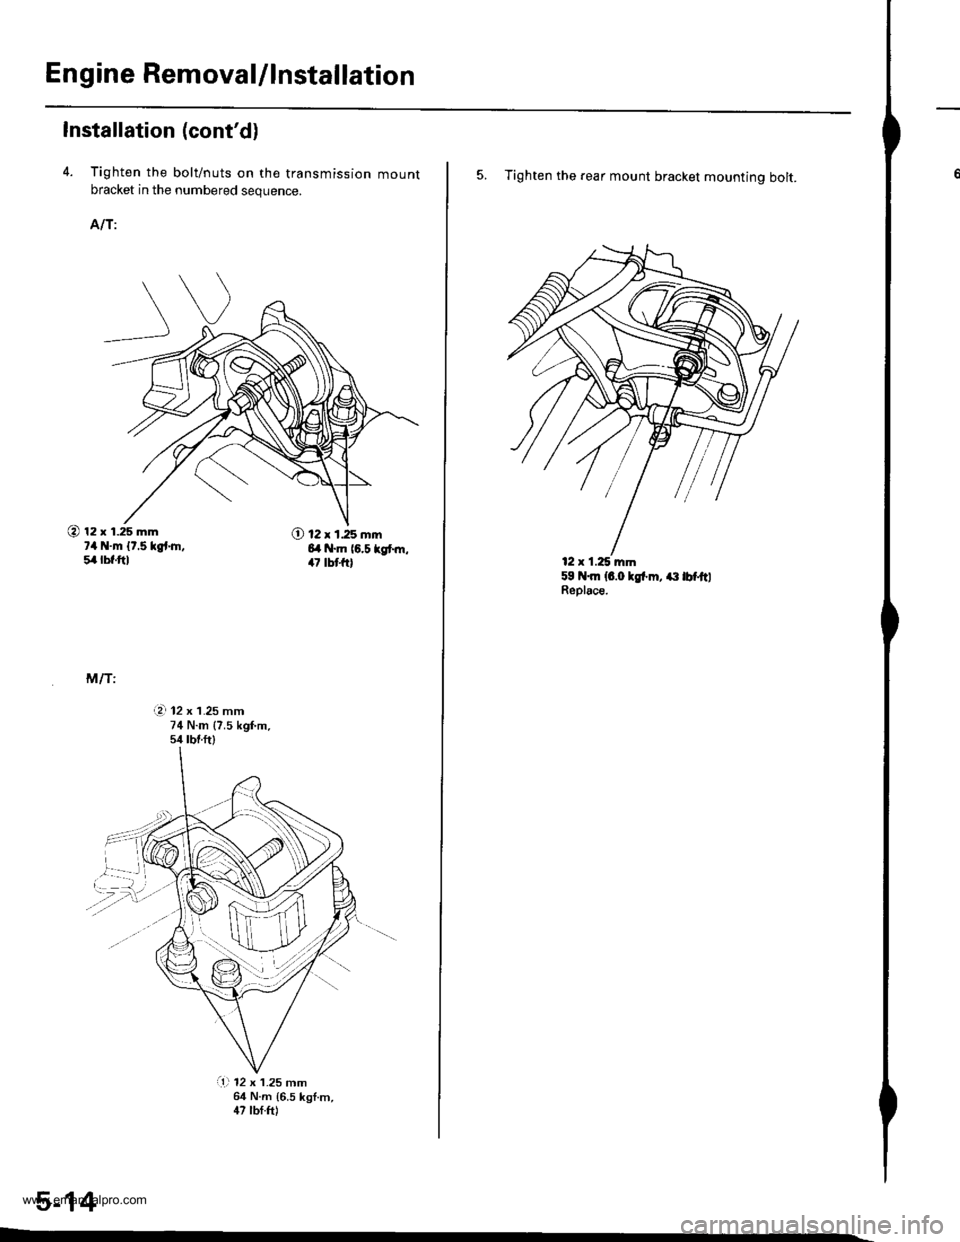 HONDA CR-V 1997 RD1-RD3 / 1.G Workshop Manual 
En gine RemovaUlnstallation
Installation (contd)
4. Tighten the bolt/nuts on the transmission mountbracket in the numbered sequence.
AIT:
@ 12 x 1.25 mm?4 N.m {t.5 kgt.h,5,4lbf.ftl
O 12 x 1.25 mm6l 